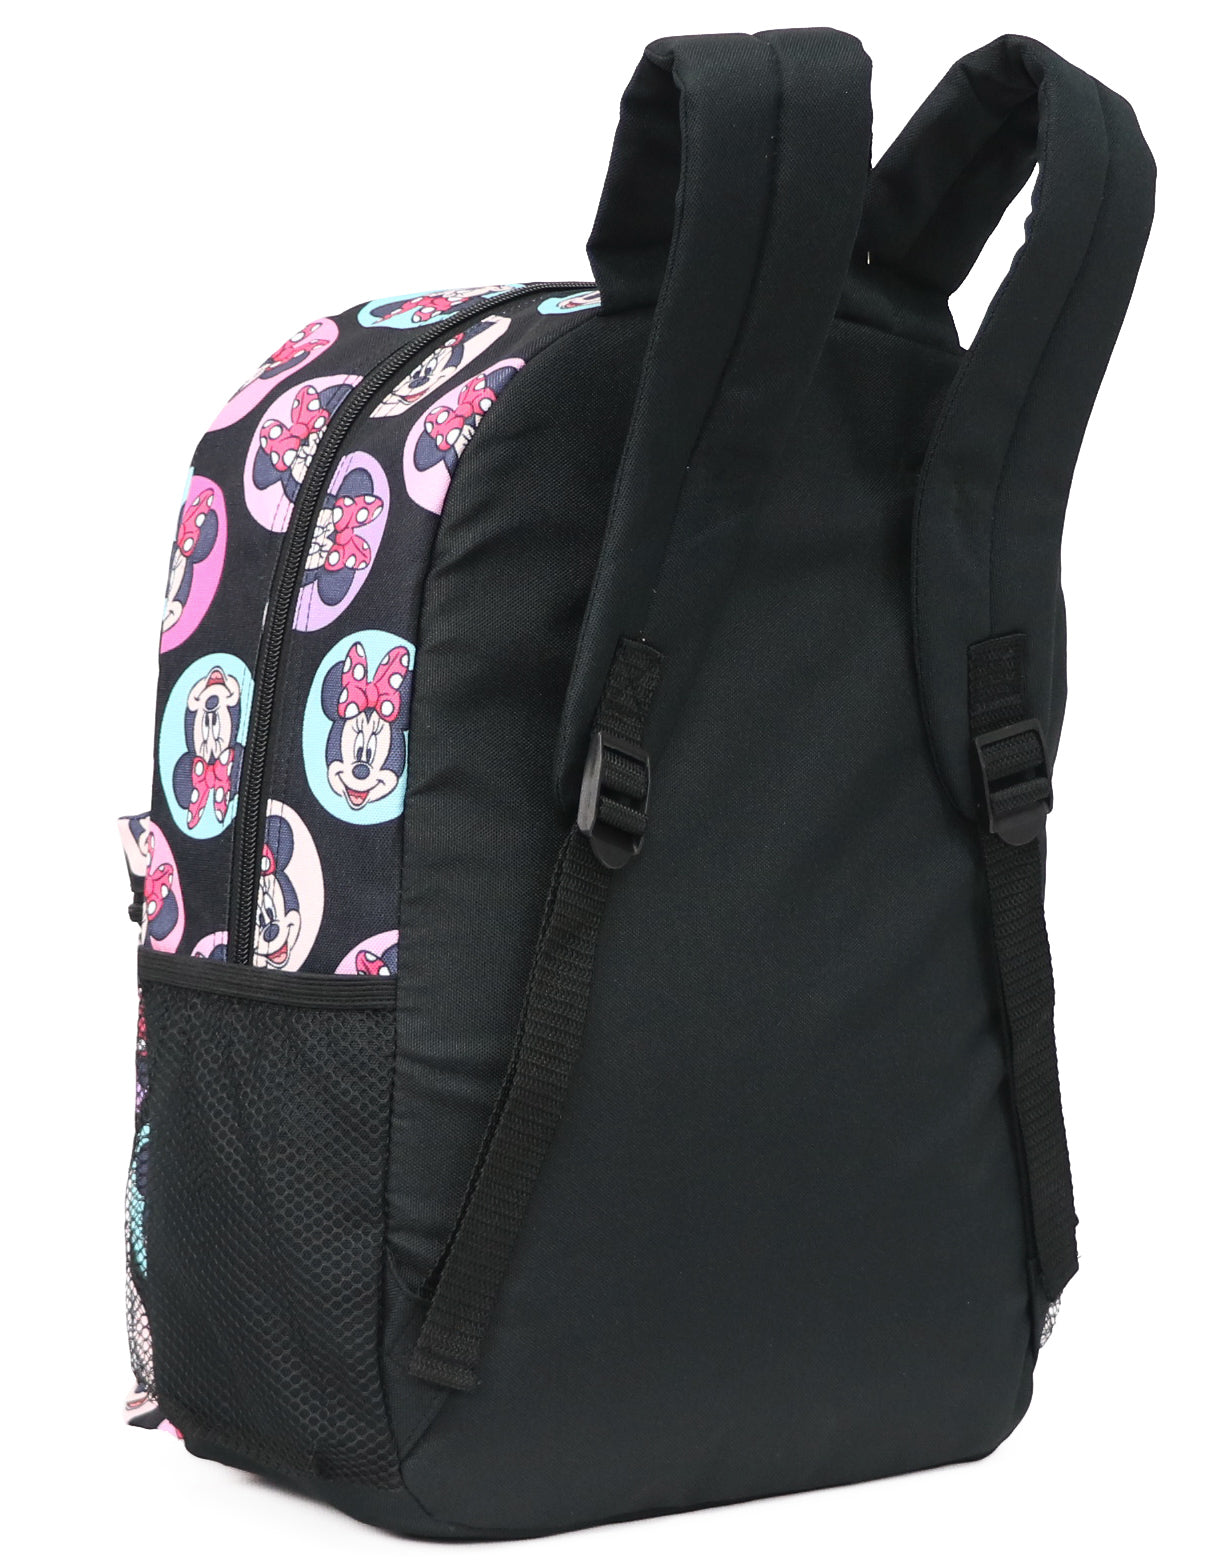 Disney Minnie Mouse Full Size All Over Print Backpack